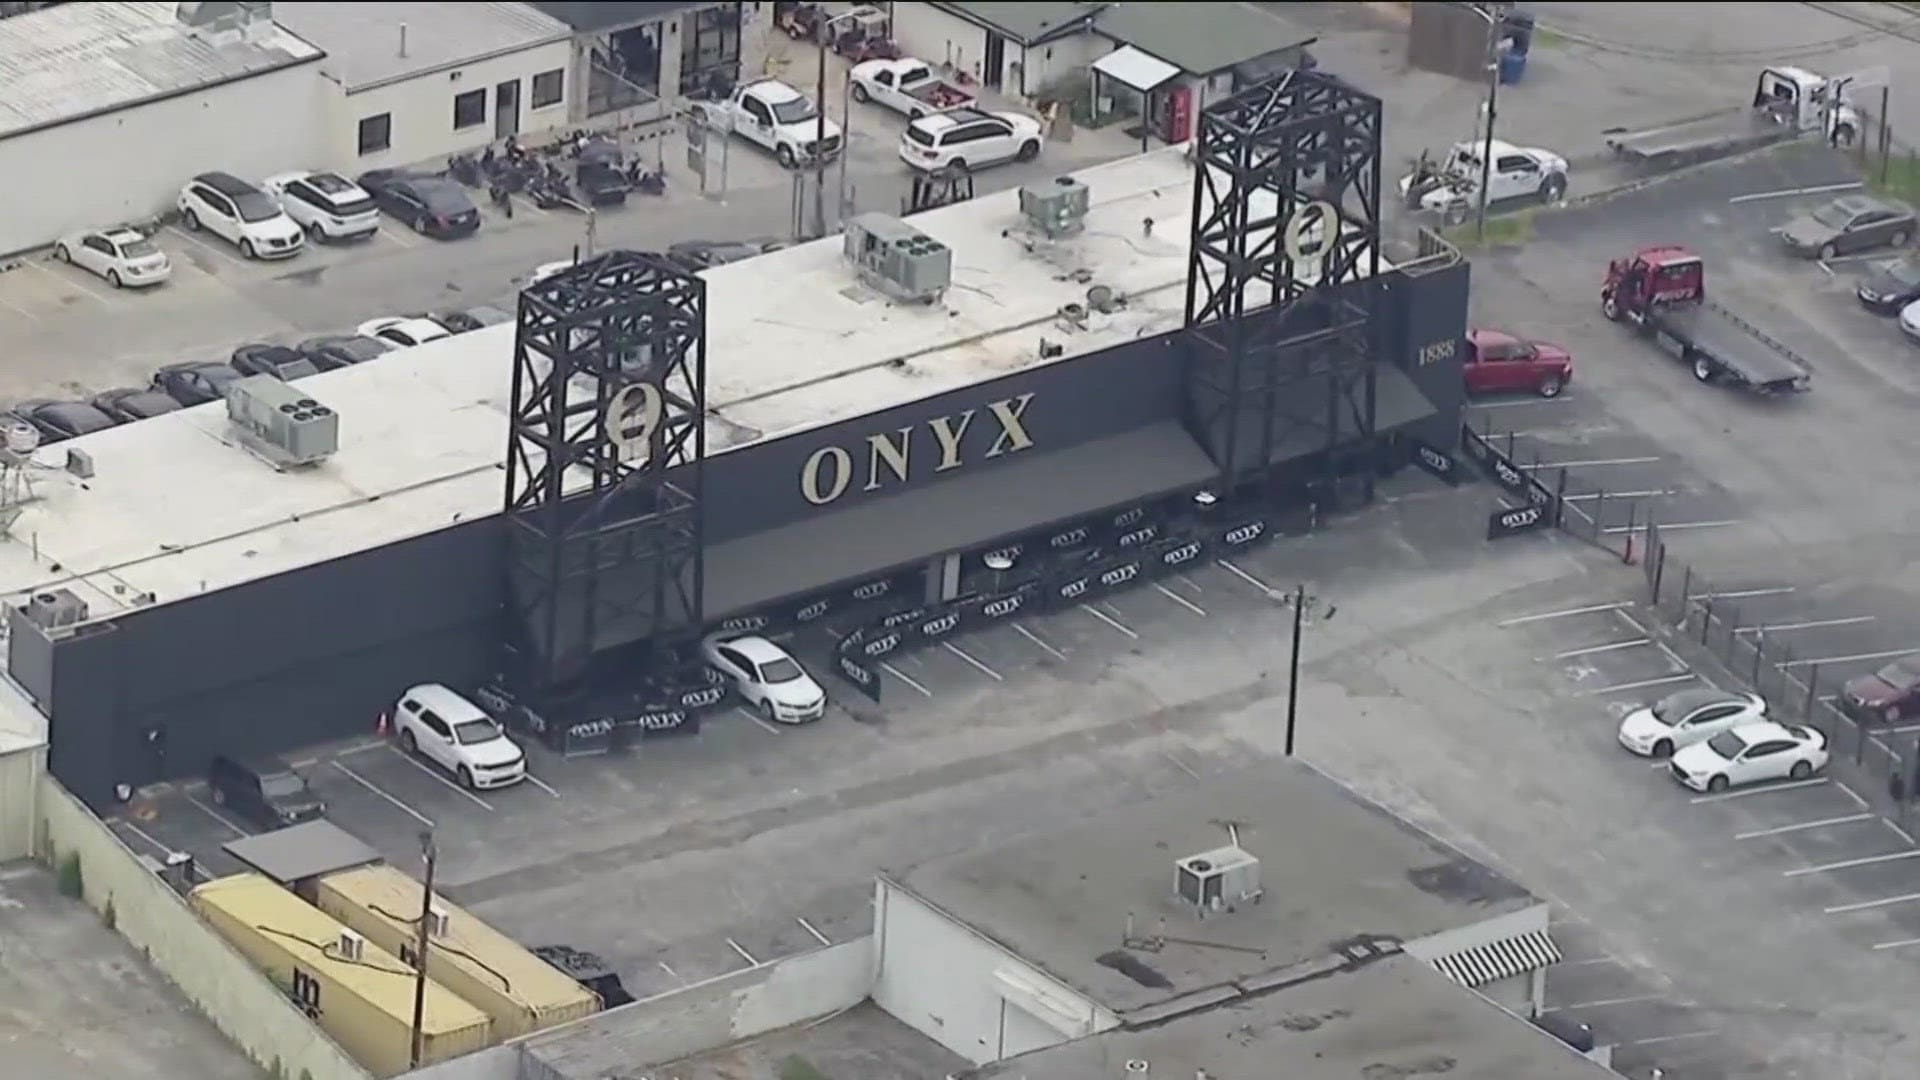 Say What Now? Burglars Stole $250K in Cash From Atlanta’s Onyx Strip Club by Cutting Hole Into Roof